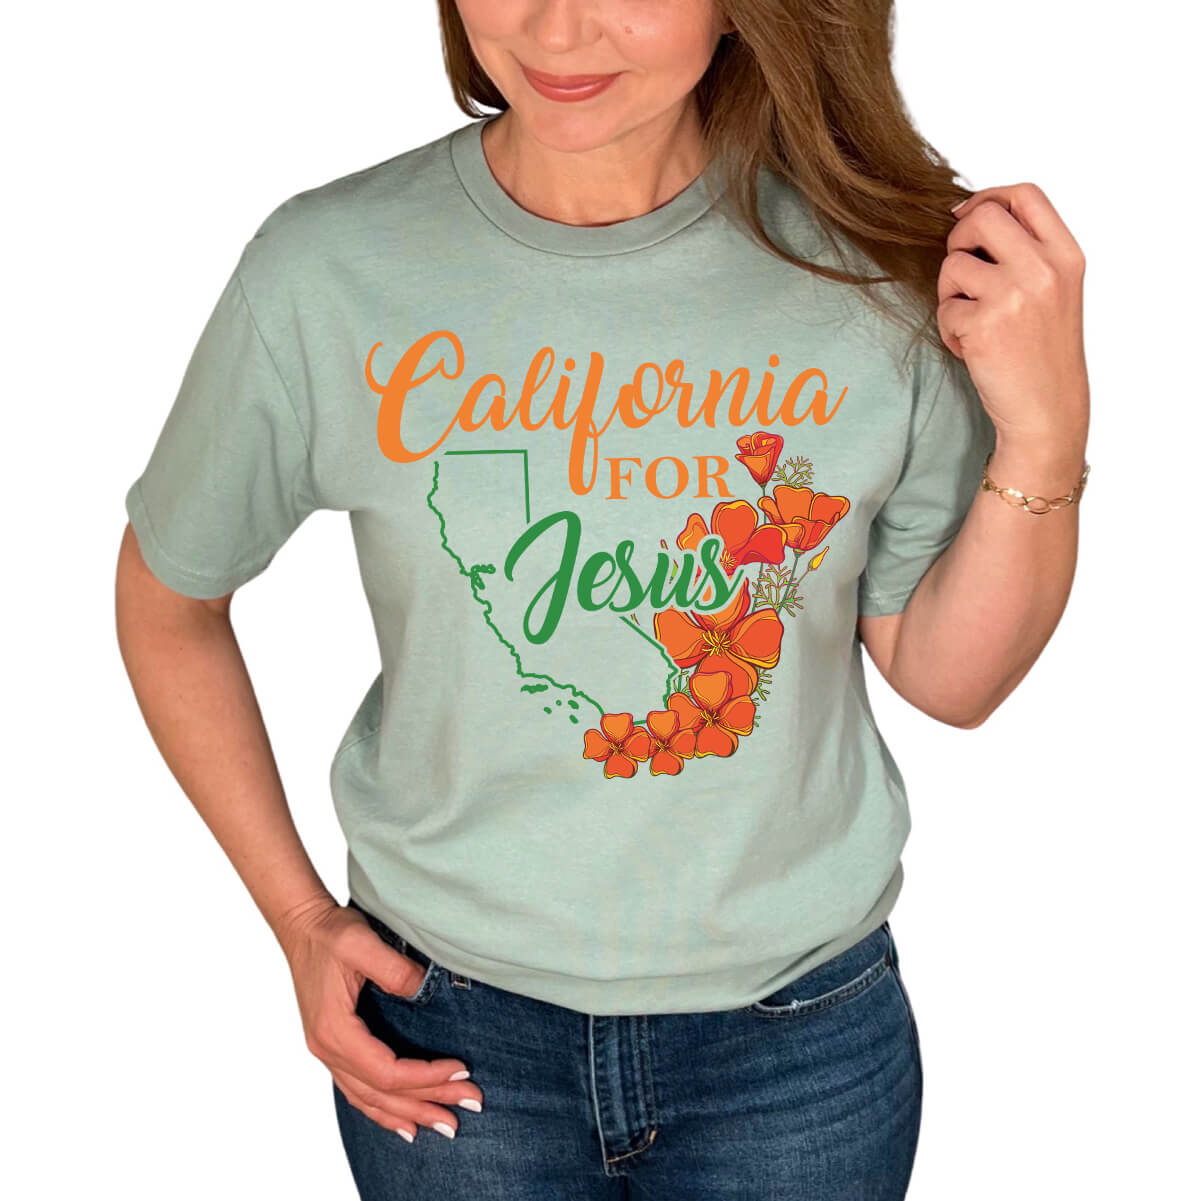 California For Jesus With Poppies T-Shirt